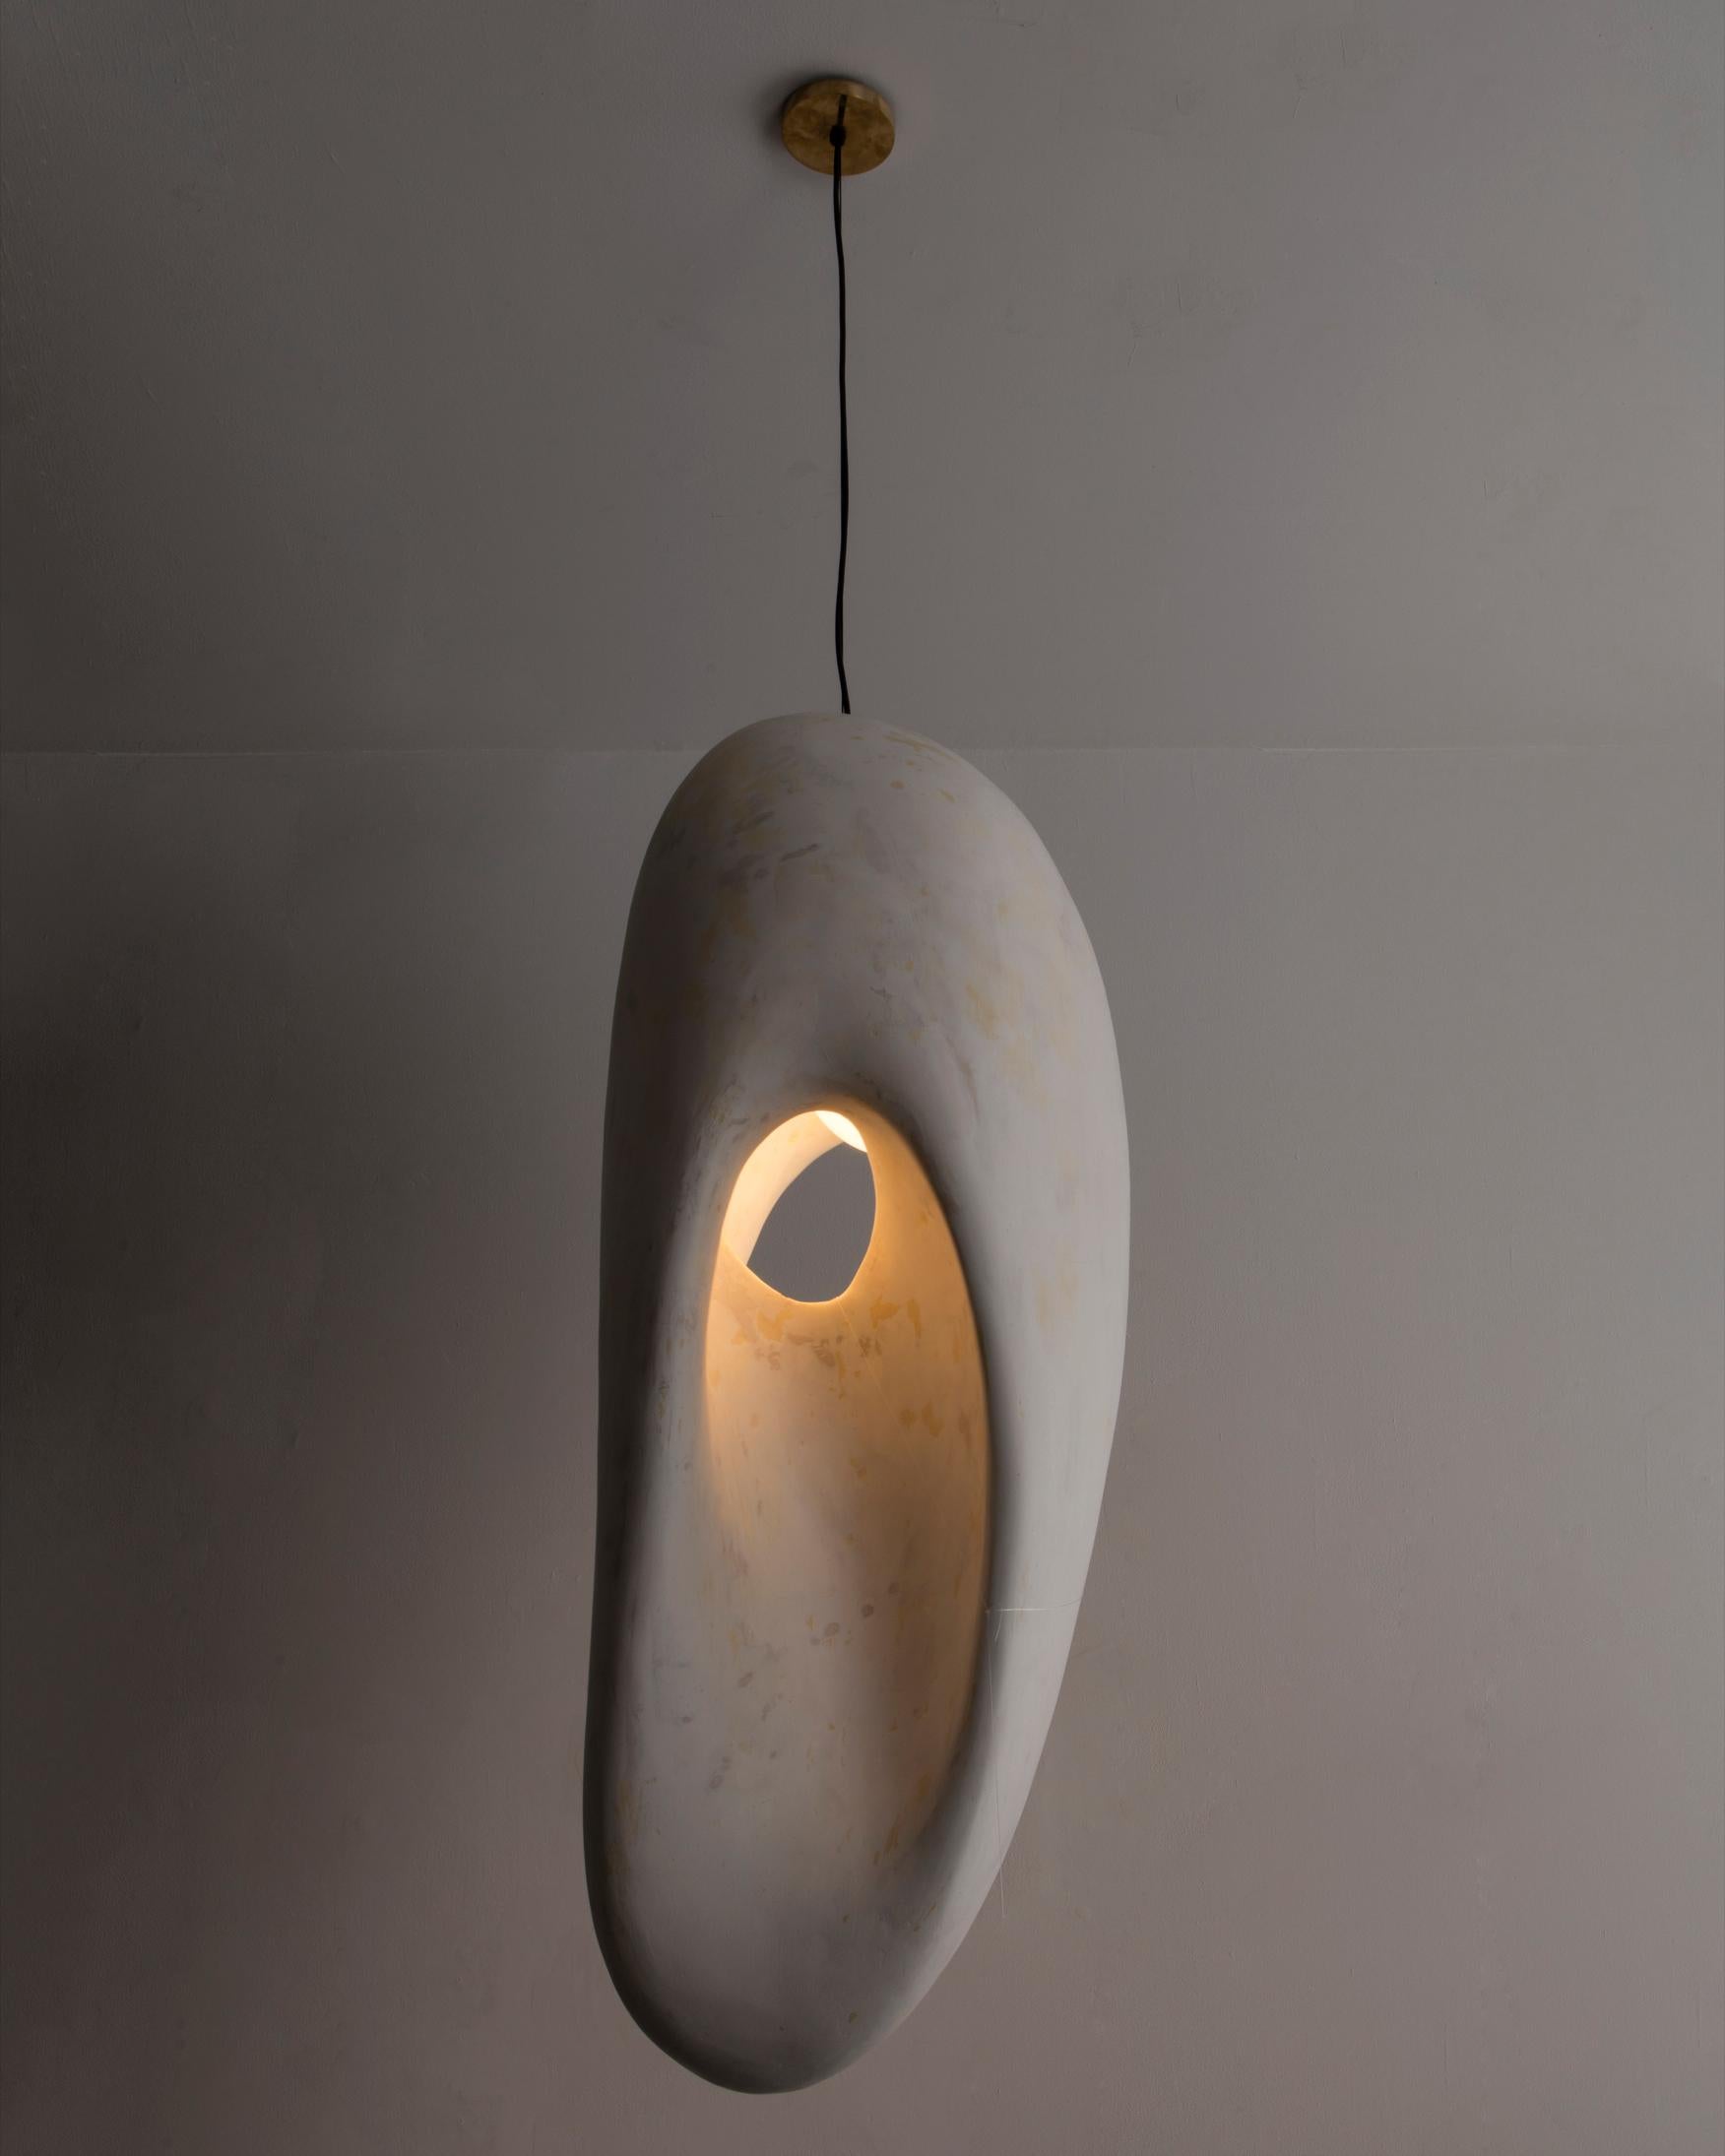 Contemporary Sculptural illuminated form in surfboard foam by Rogan Gregory